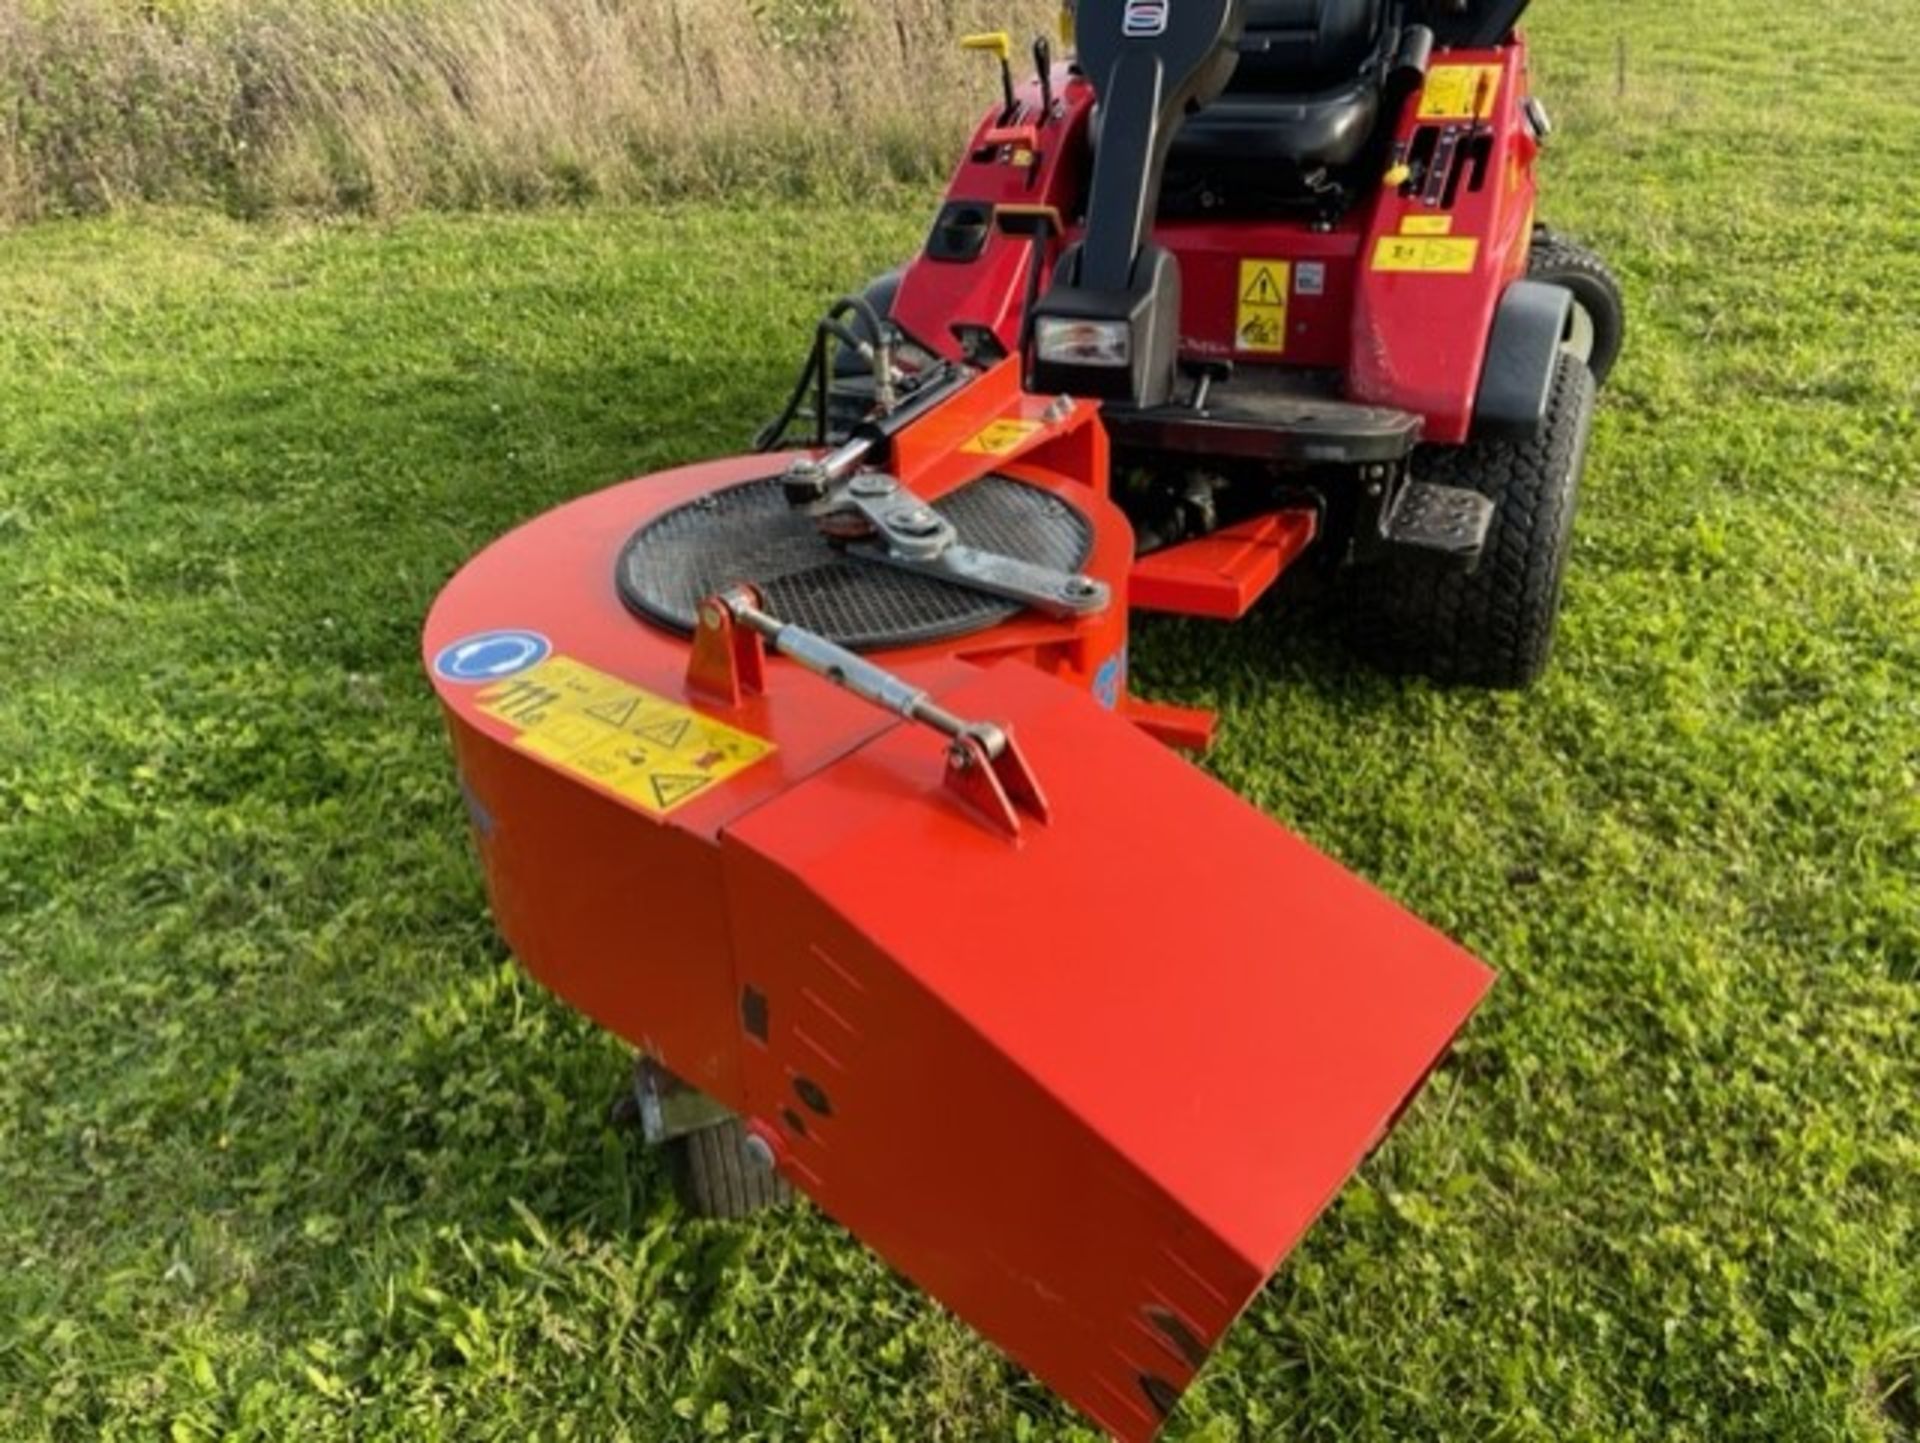 2018, SHIBAURA CM374 OUTFRONT MOWER WITH DECK & BLOWER - Image 9 of 13